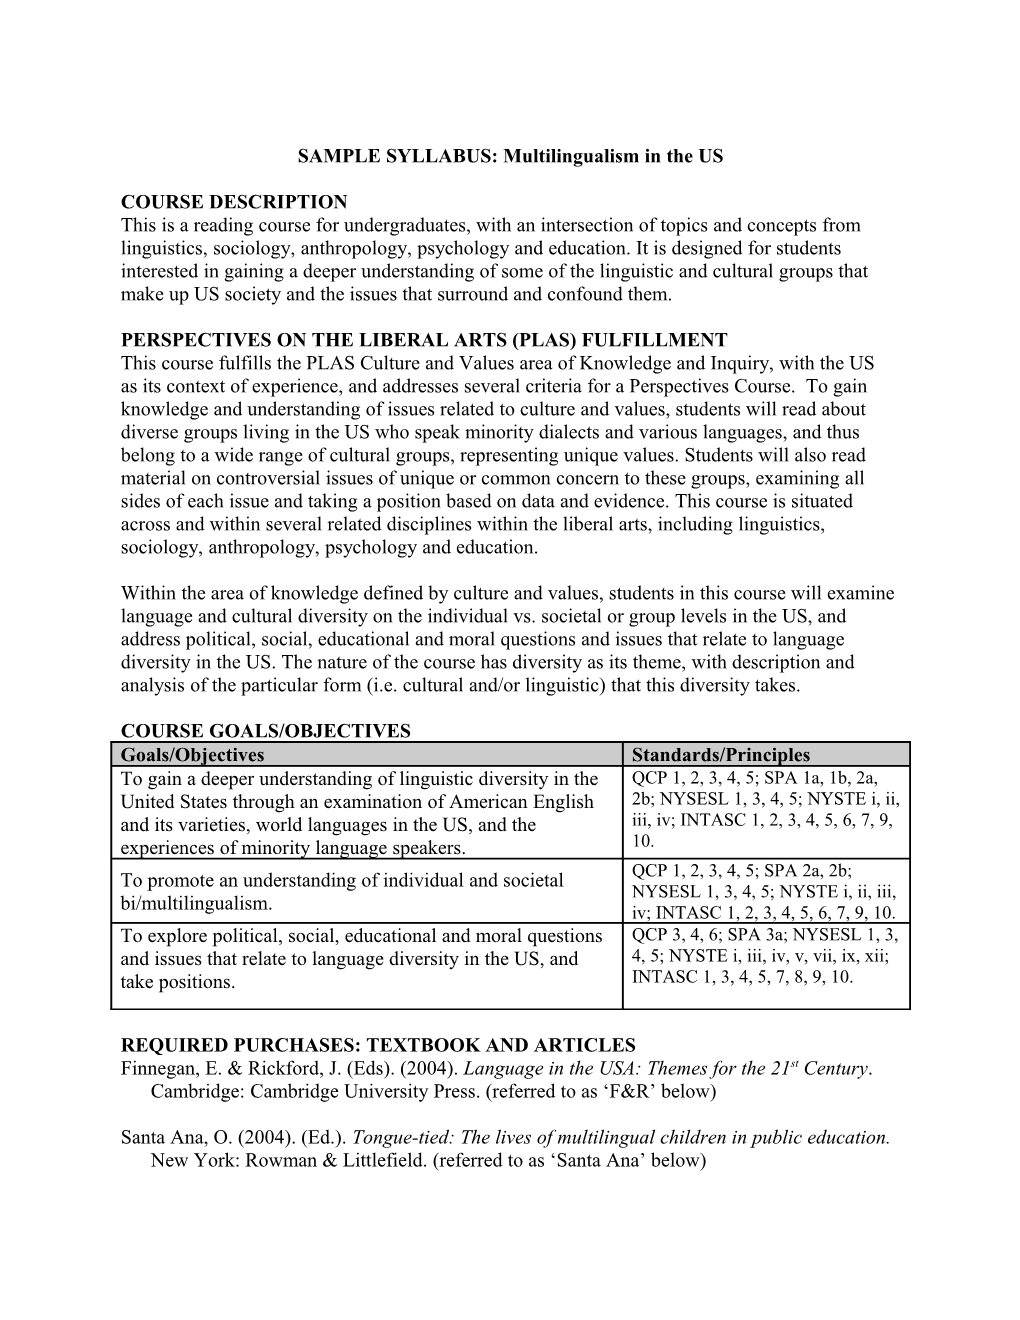 SAMPLE SYLLABUS: Multilingualism in the US